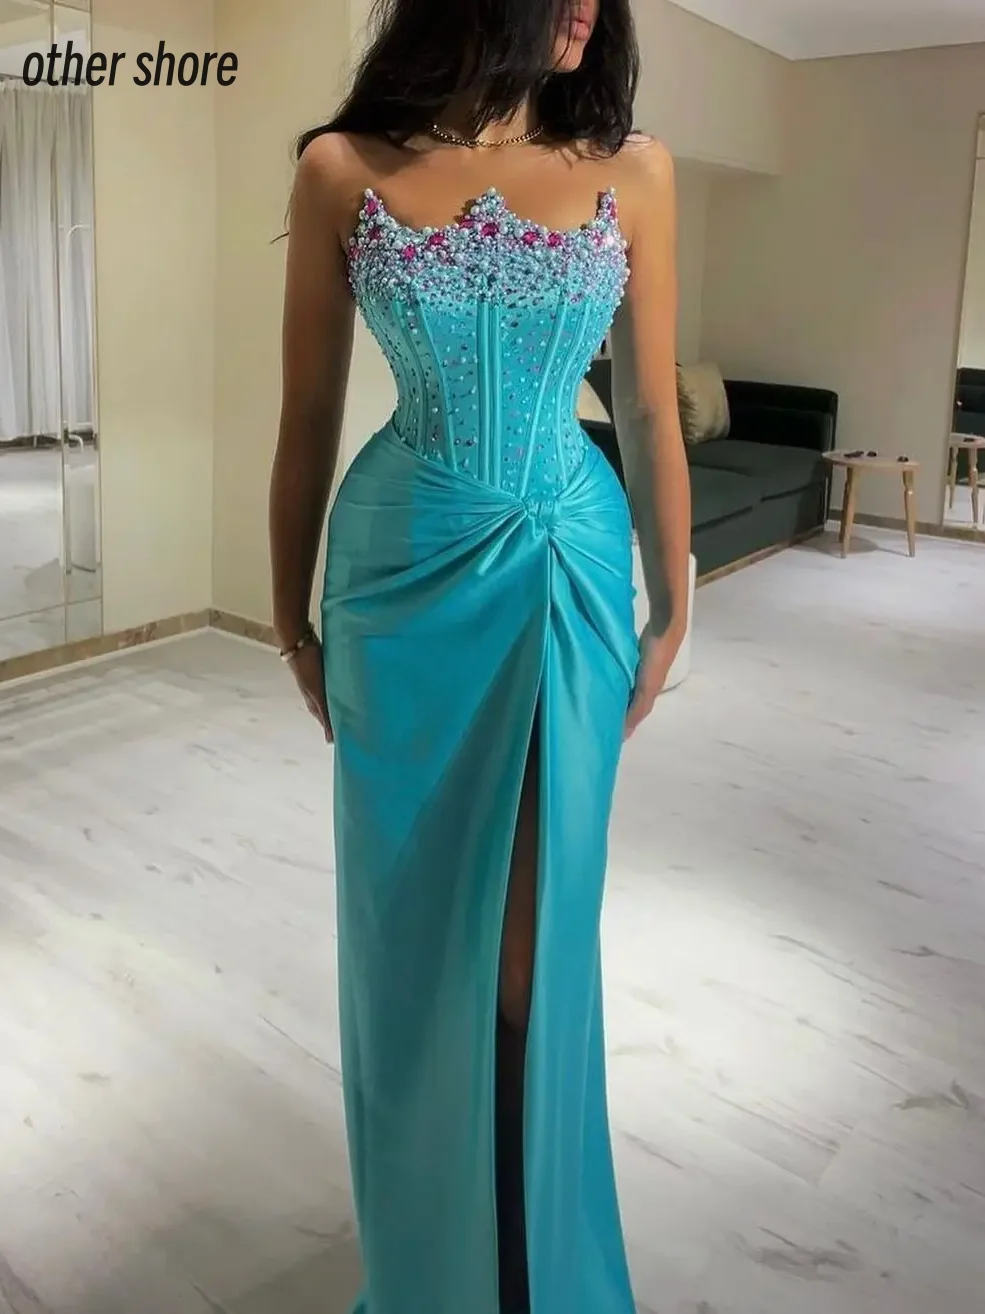 

Other Shore Elegant Vintage Sweet Sexy Mermaid Crystal Beading Pearls Customize Formal Occasion Prom Dress Evening Party Gowns